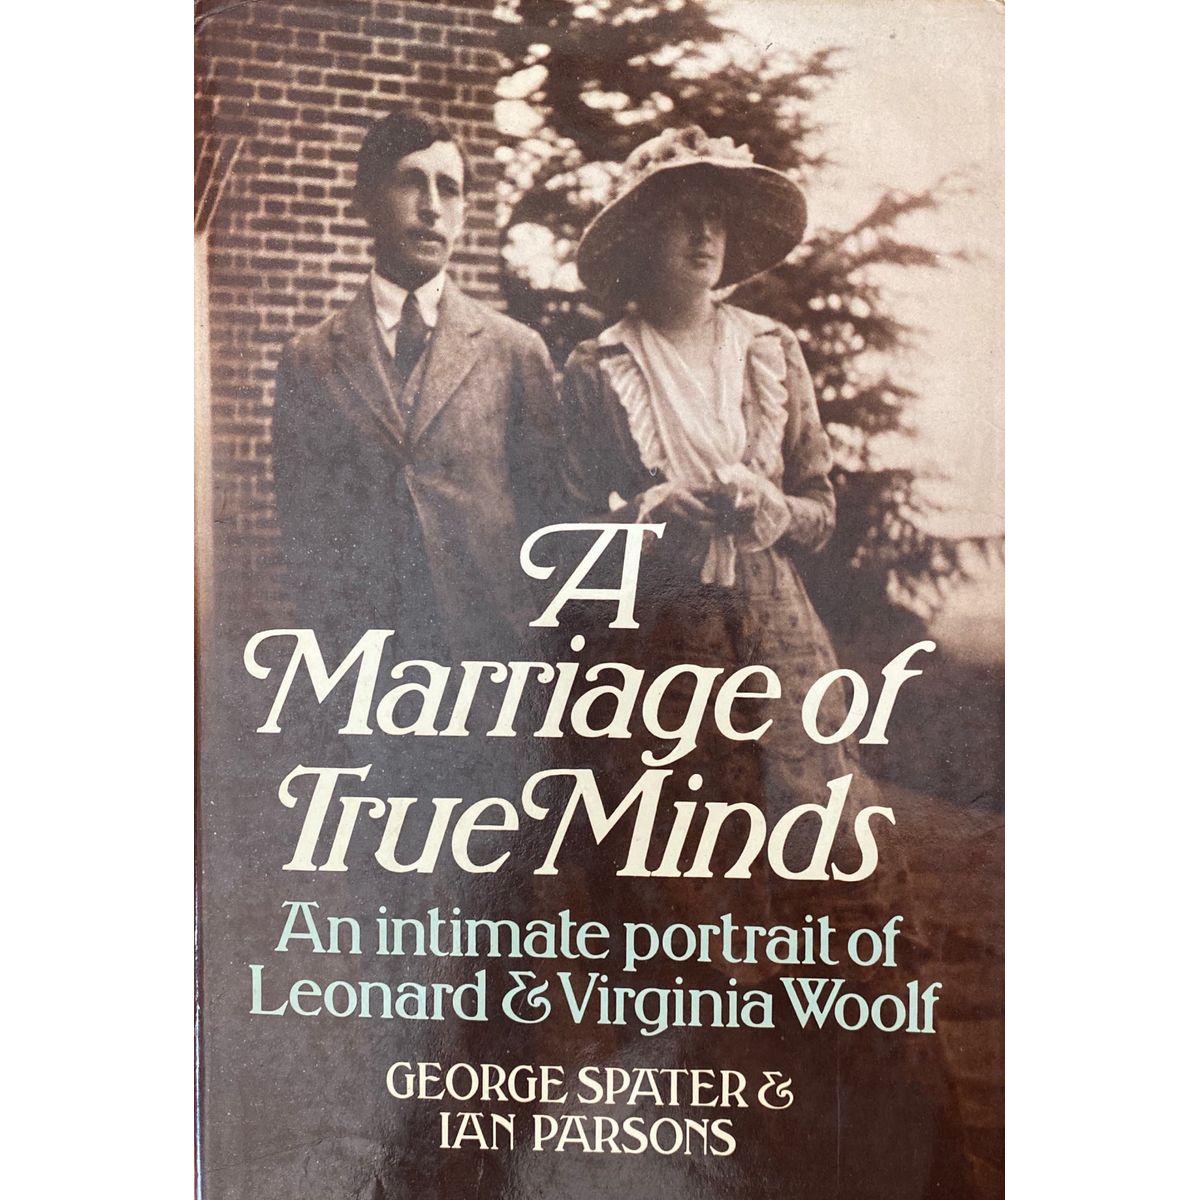 ISBN: 9780701204365 / 0701204362 - A Marriage of True Minds: An Intimate Portrait of Leonard and Virginia Woolf by George Spater & Ian Parsons [1977]